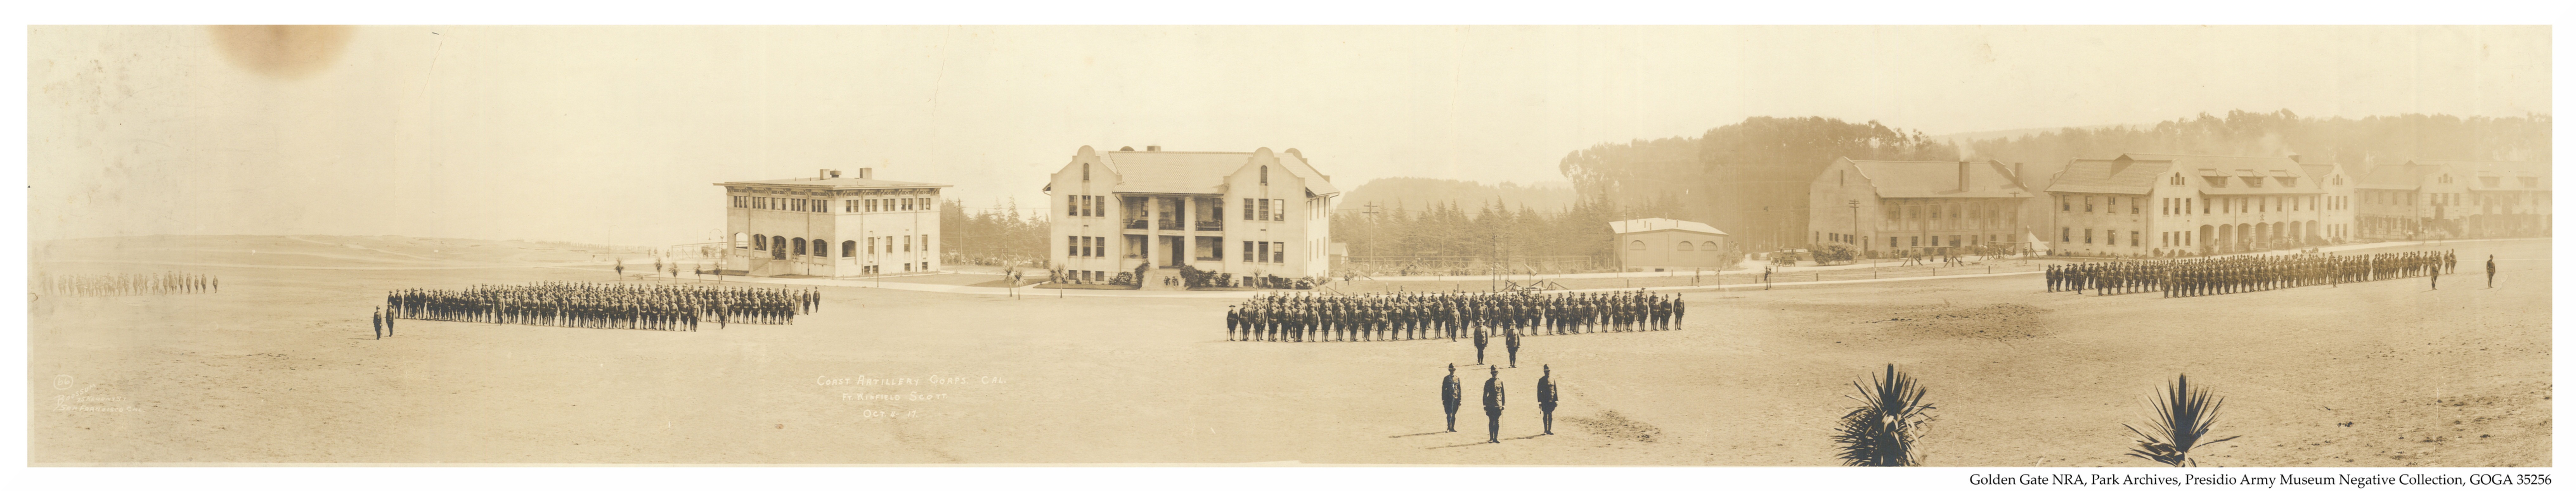 Review of the coast artillery corps in 1917 at Fort Winfield Scott in the Presidio of San Francisco 